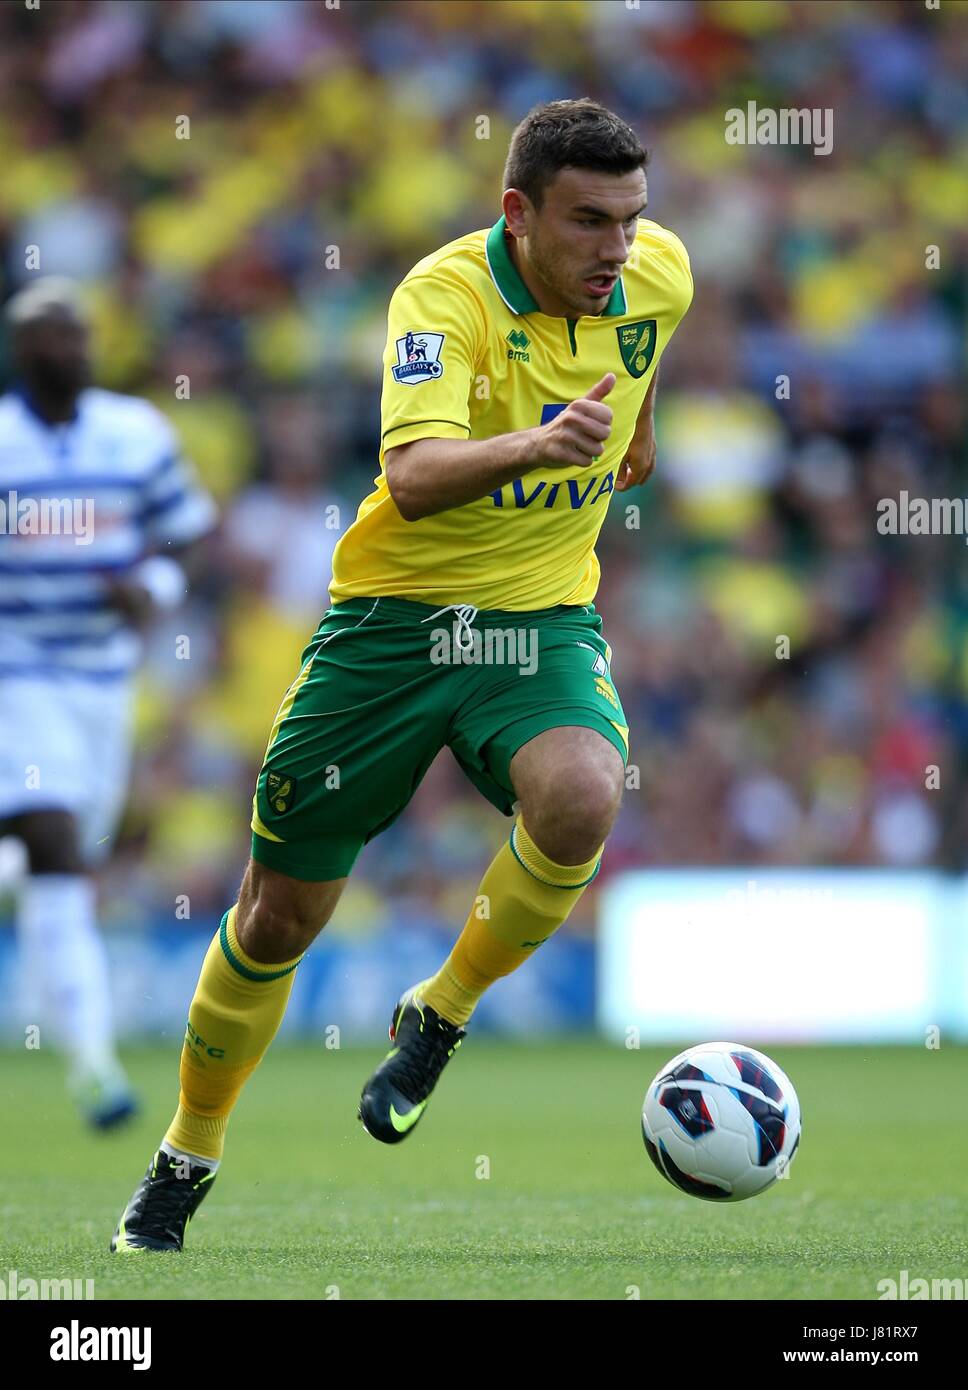 ROBERT SNODGRASS NORWICH CITY FC NORWICH CITY V QPR BARCLAYS PREMIER LEAGUE CARROW ROAD, NORWICH, ENGLAND 25 August 2012 GAO57019     WARNING! This Photograph May Only Be Used For Newspaper And/Or Magazine Editorial Purposes. May Not Be Used For Publications Involving 1 player, 1 Club Or 1 Competition  Without Written Authorisation From Football DataCo Ltd. For Any Queries, Please Contact Football DataCo Ltd on +44 (0) 207 864 9121 Stock Photo